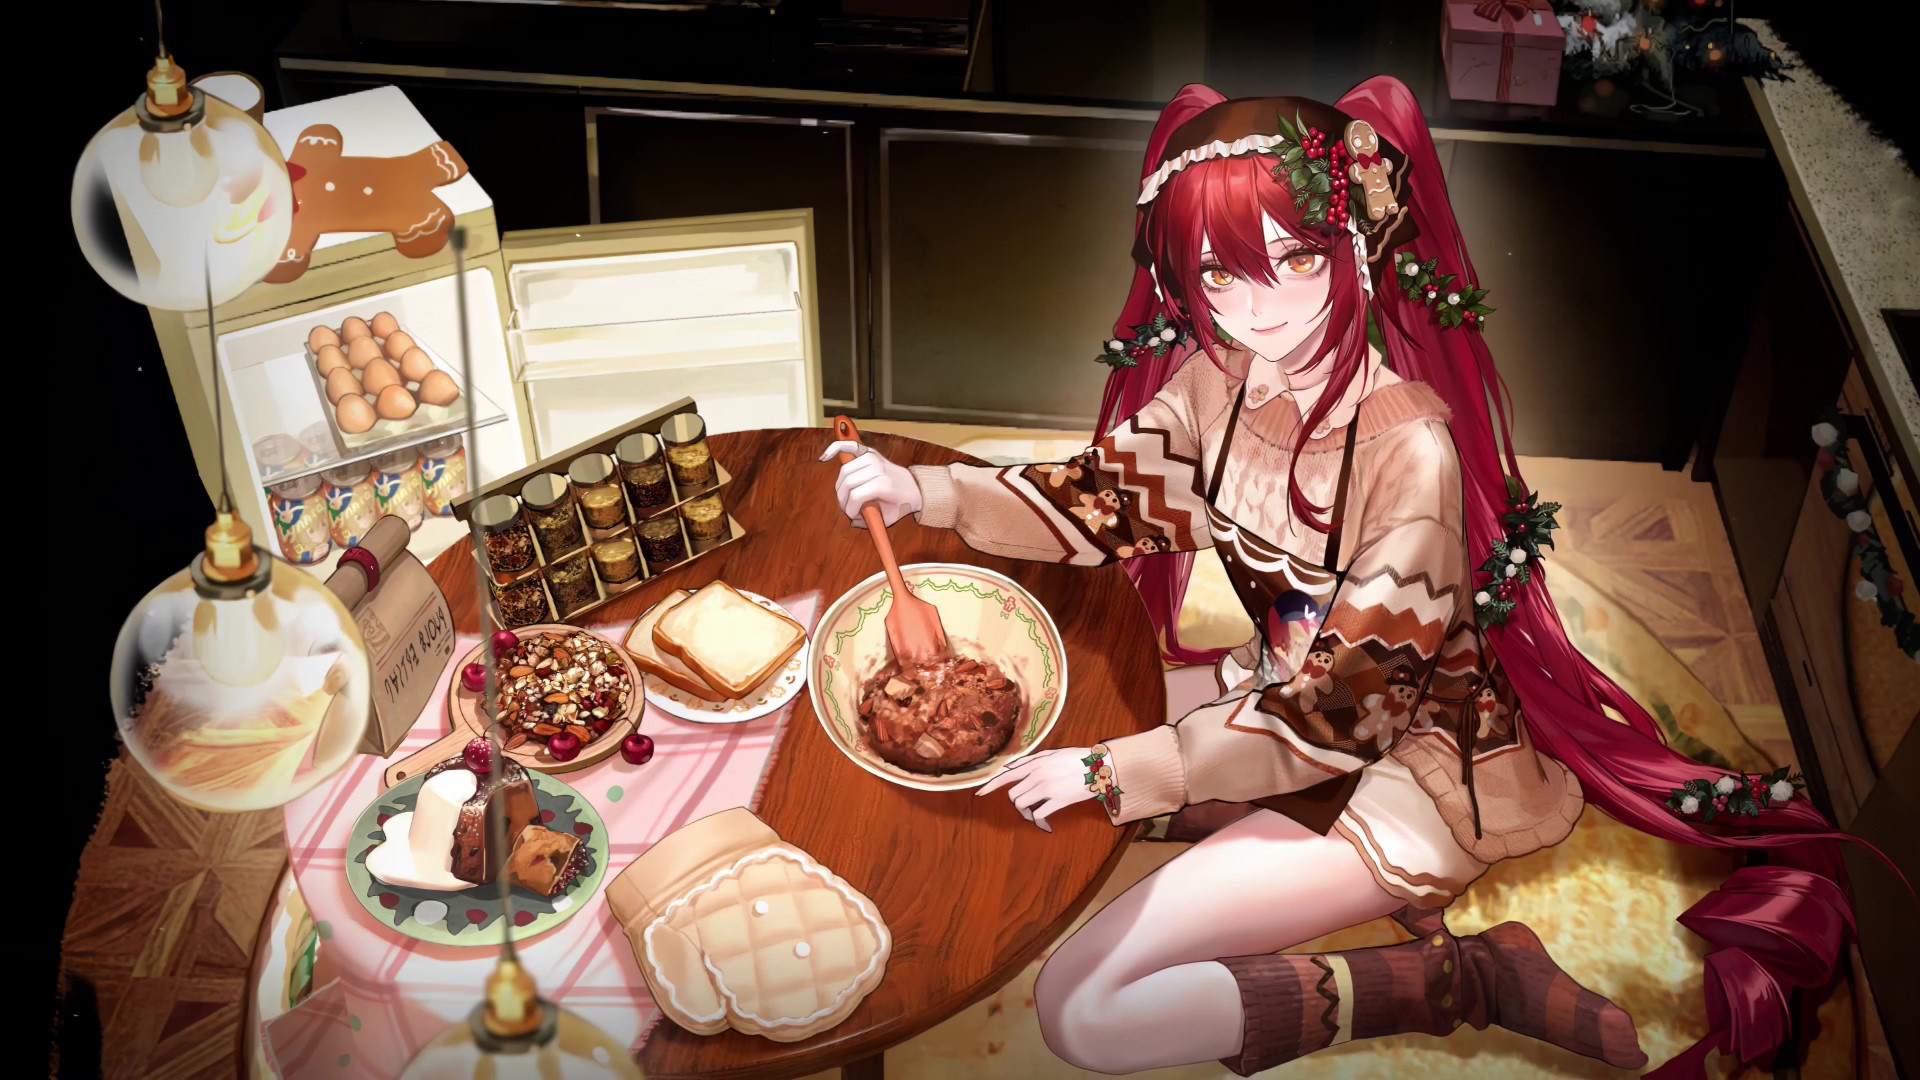 Baking Cake - Anime Love and Romance Wallpapers and Images - Desktop Nexus  Groups